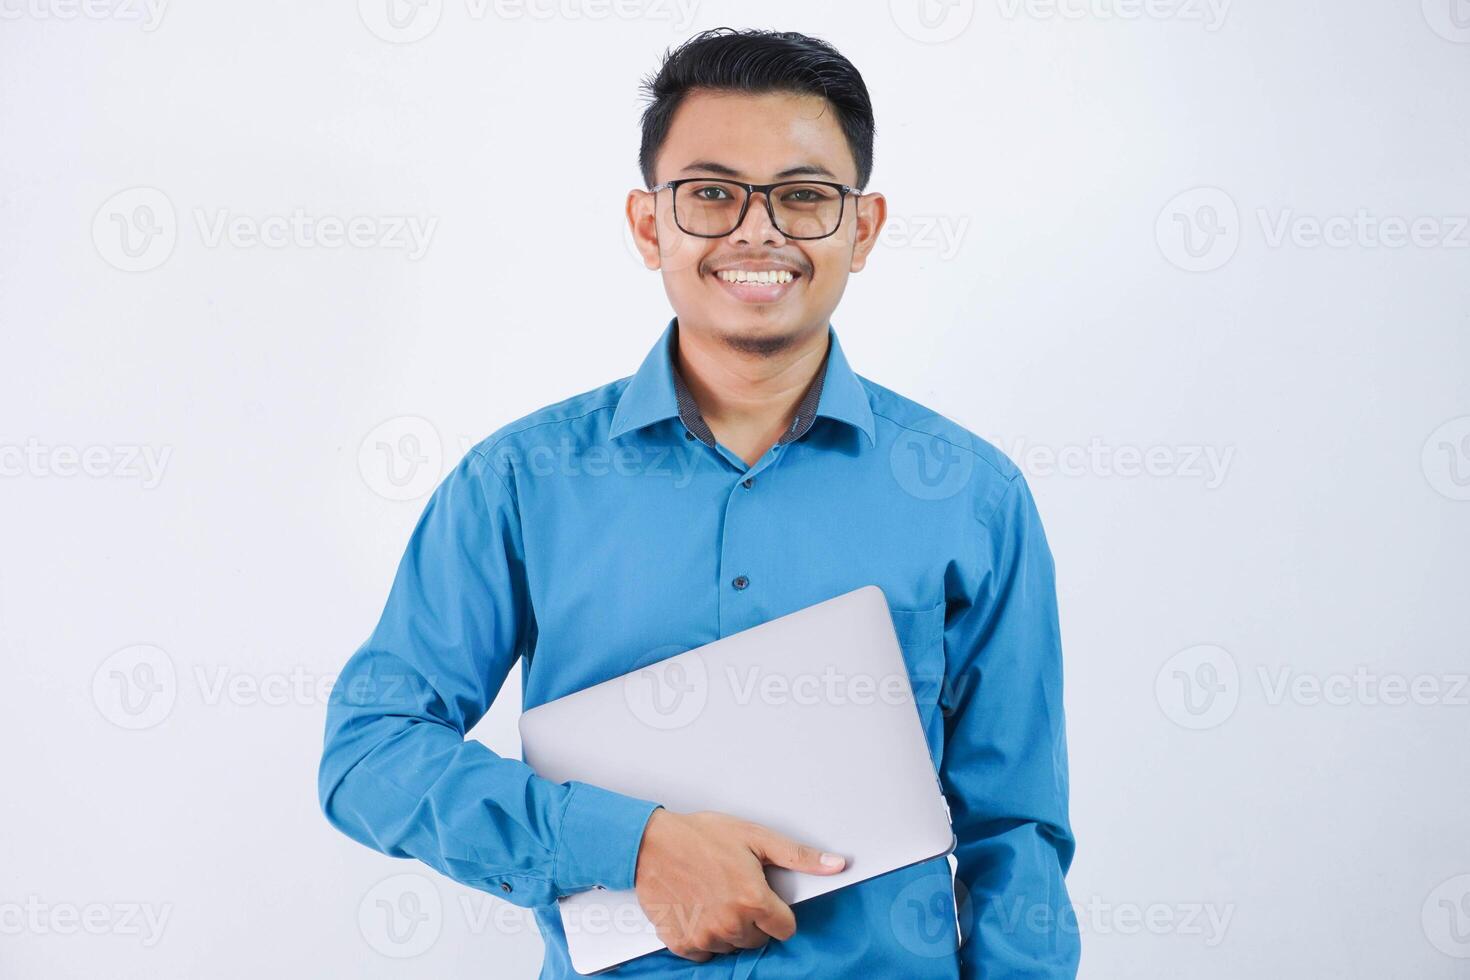 smiling or happy asian businessman with glasses holding laptop wearing blue shirt isolated on white background photo